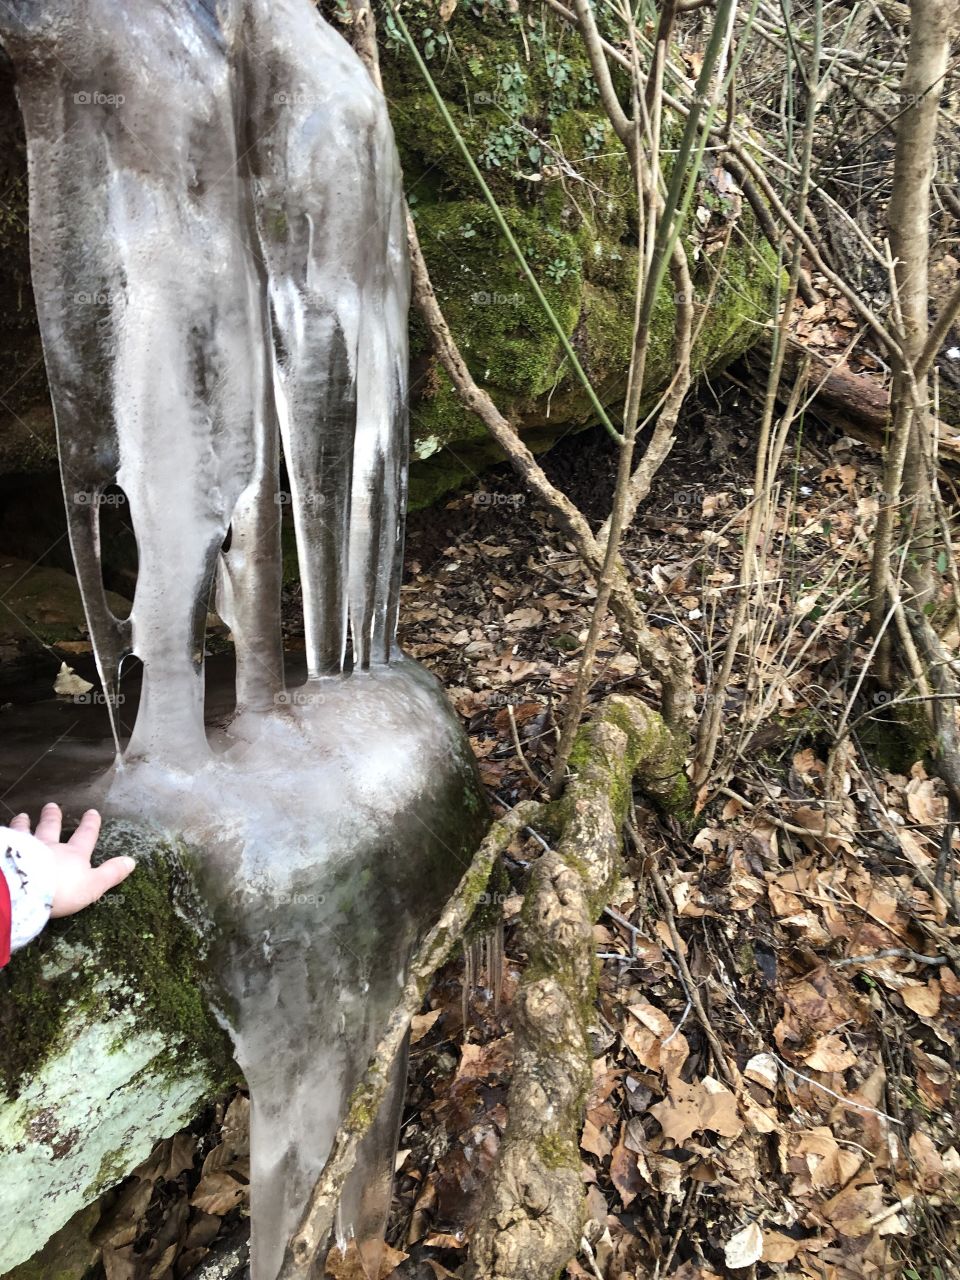 A massive icicle formation on a mossy cliff face in the dead of winter 